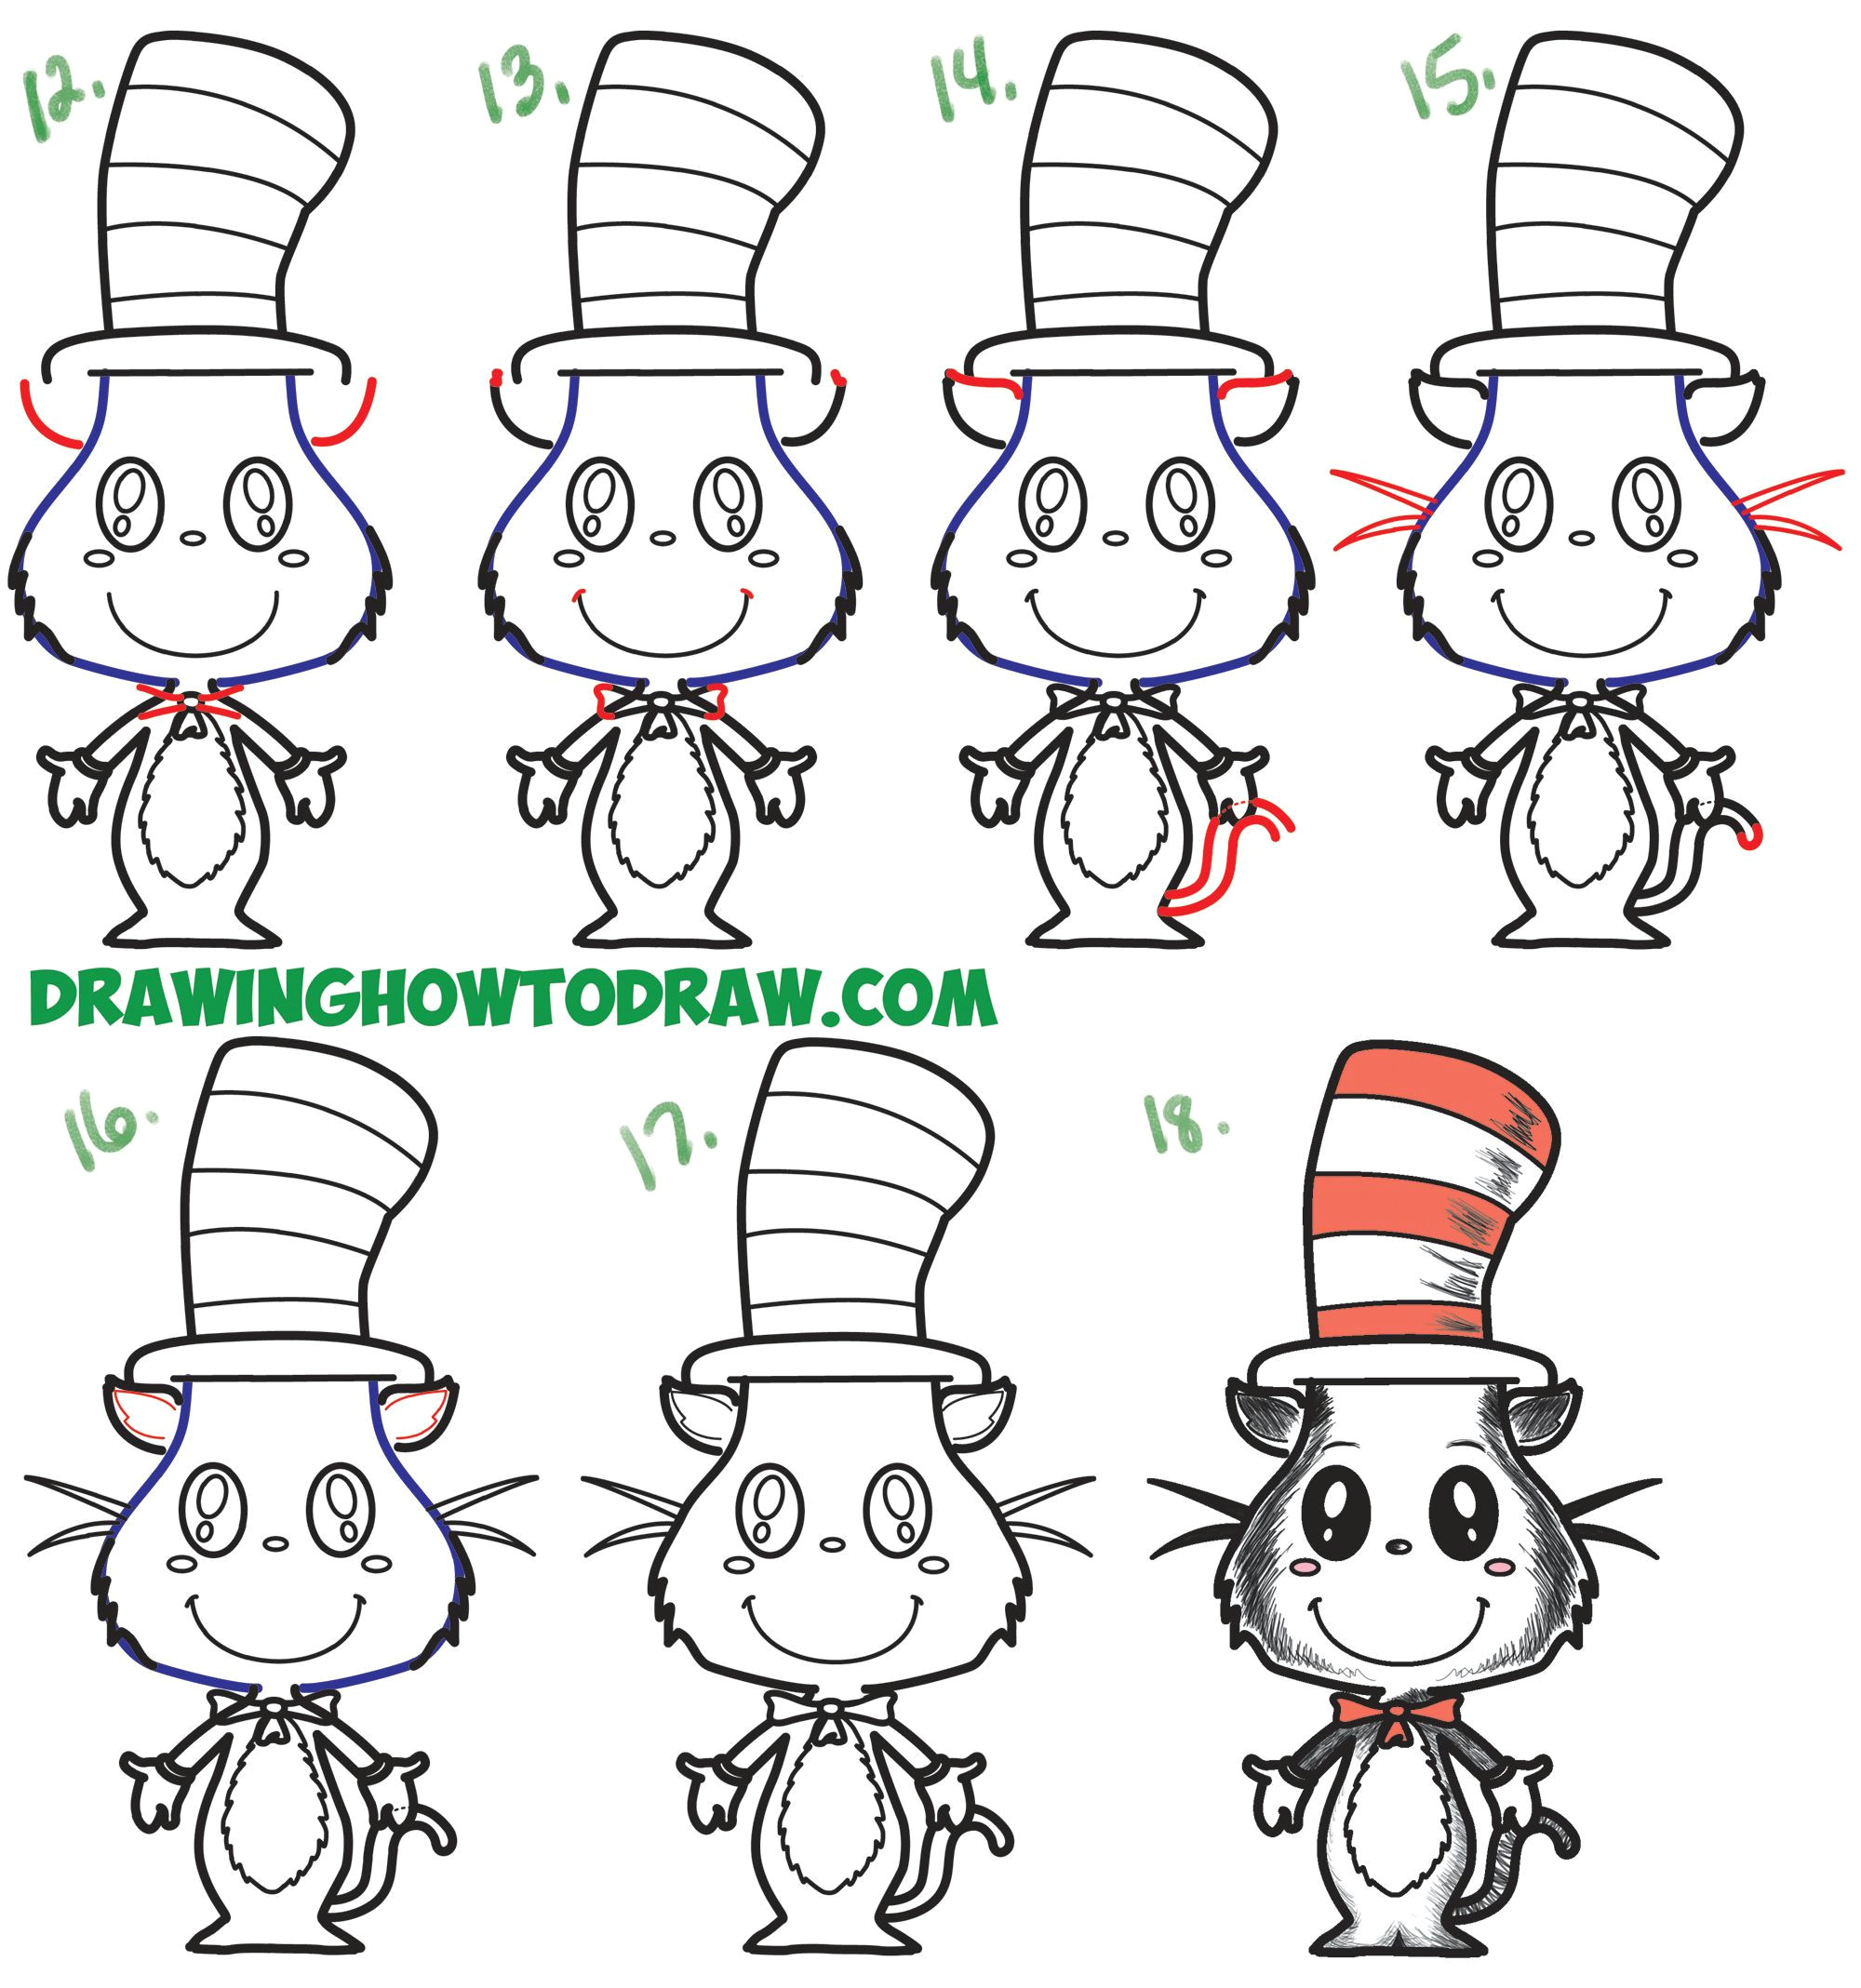 images of easy drawings how to draw the cat in the hat cute kawaii chibi version